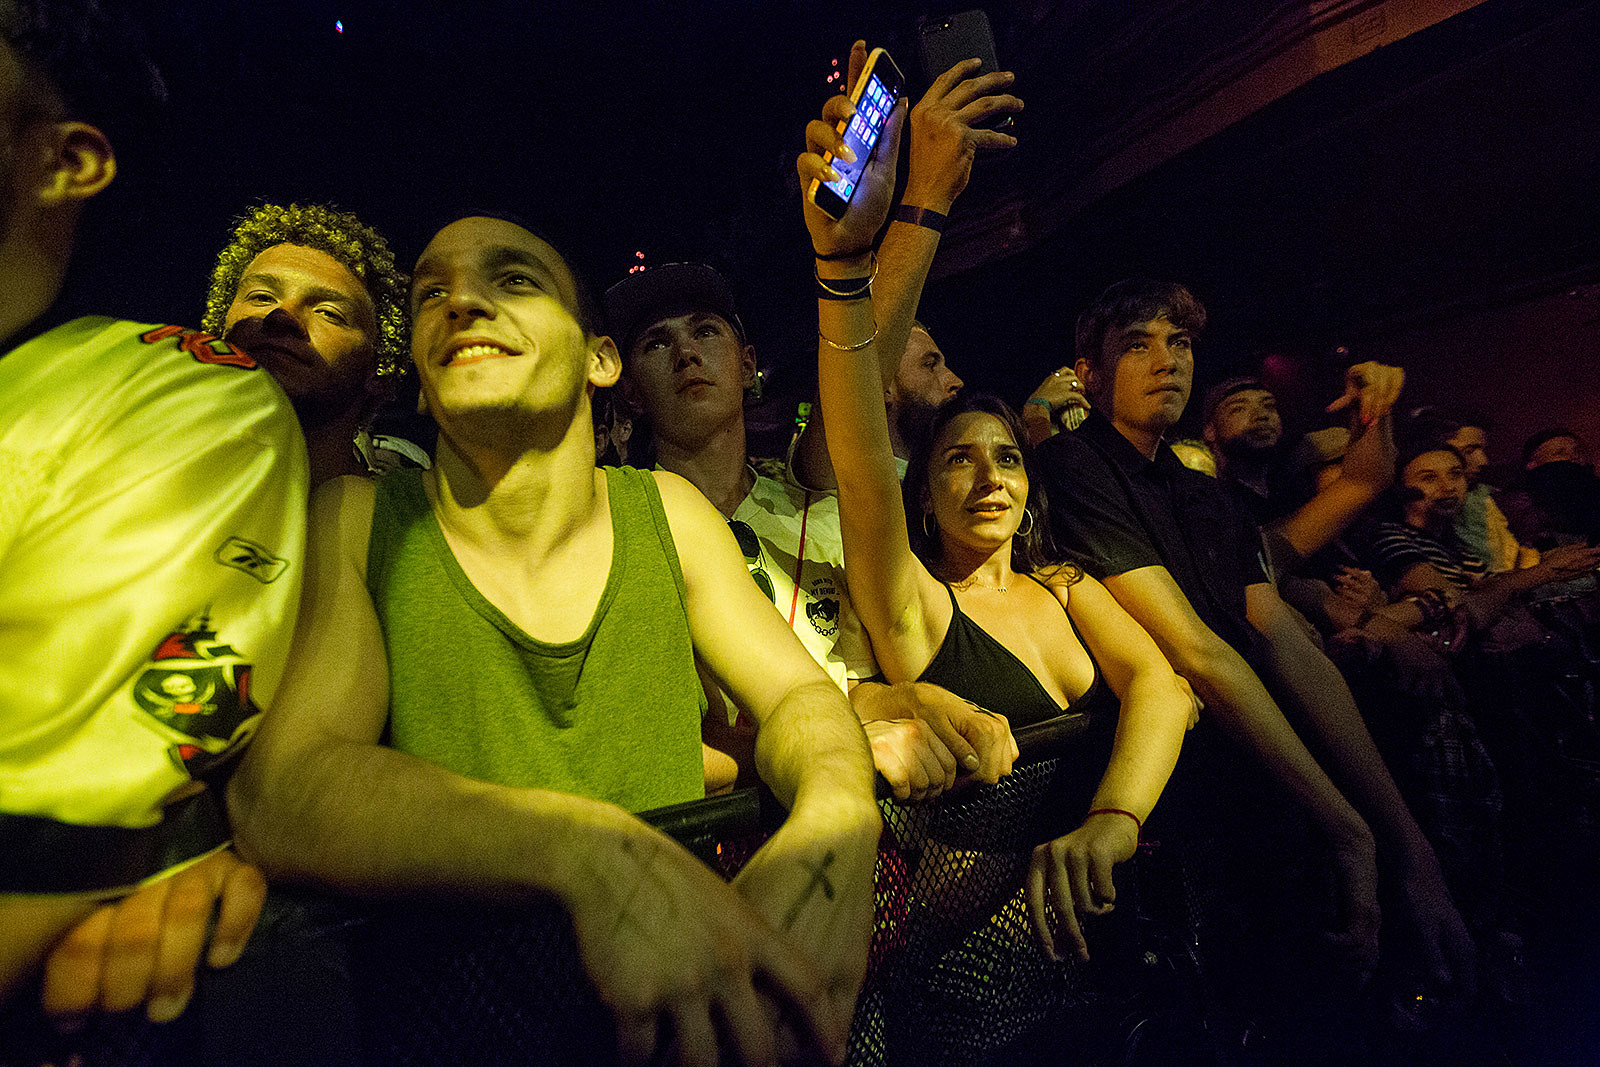 The End of an Era at Webster Hall